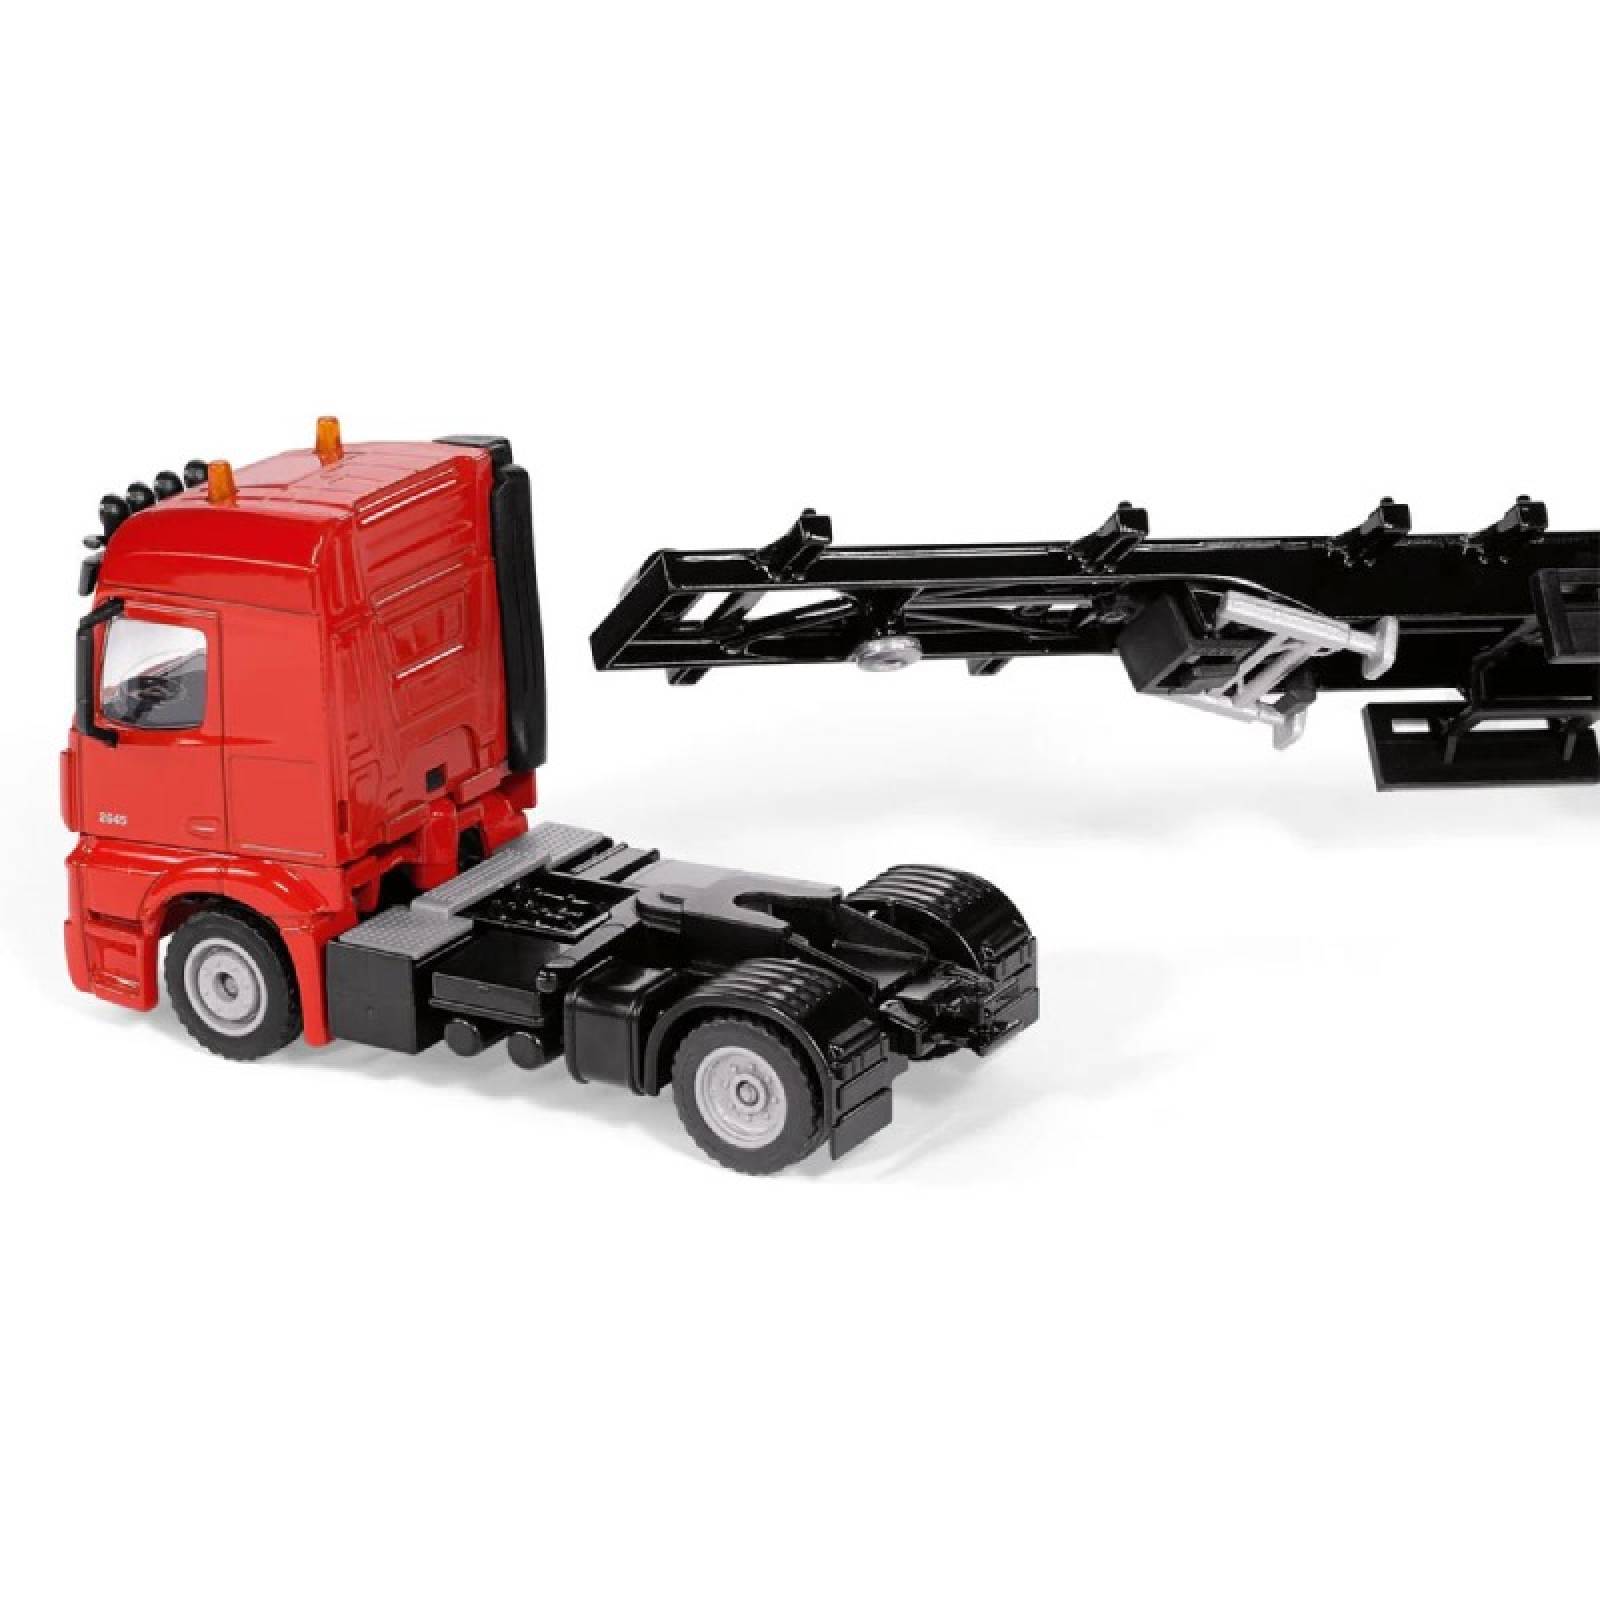 Mercedes-Benz Truck With Tank Container - Die Cast Toy Vehicle thumbnails